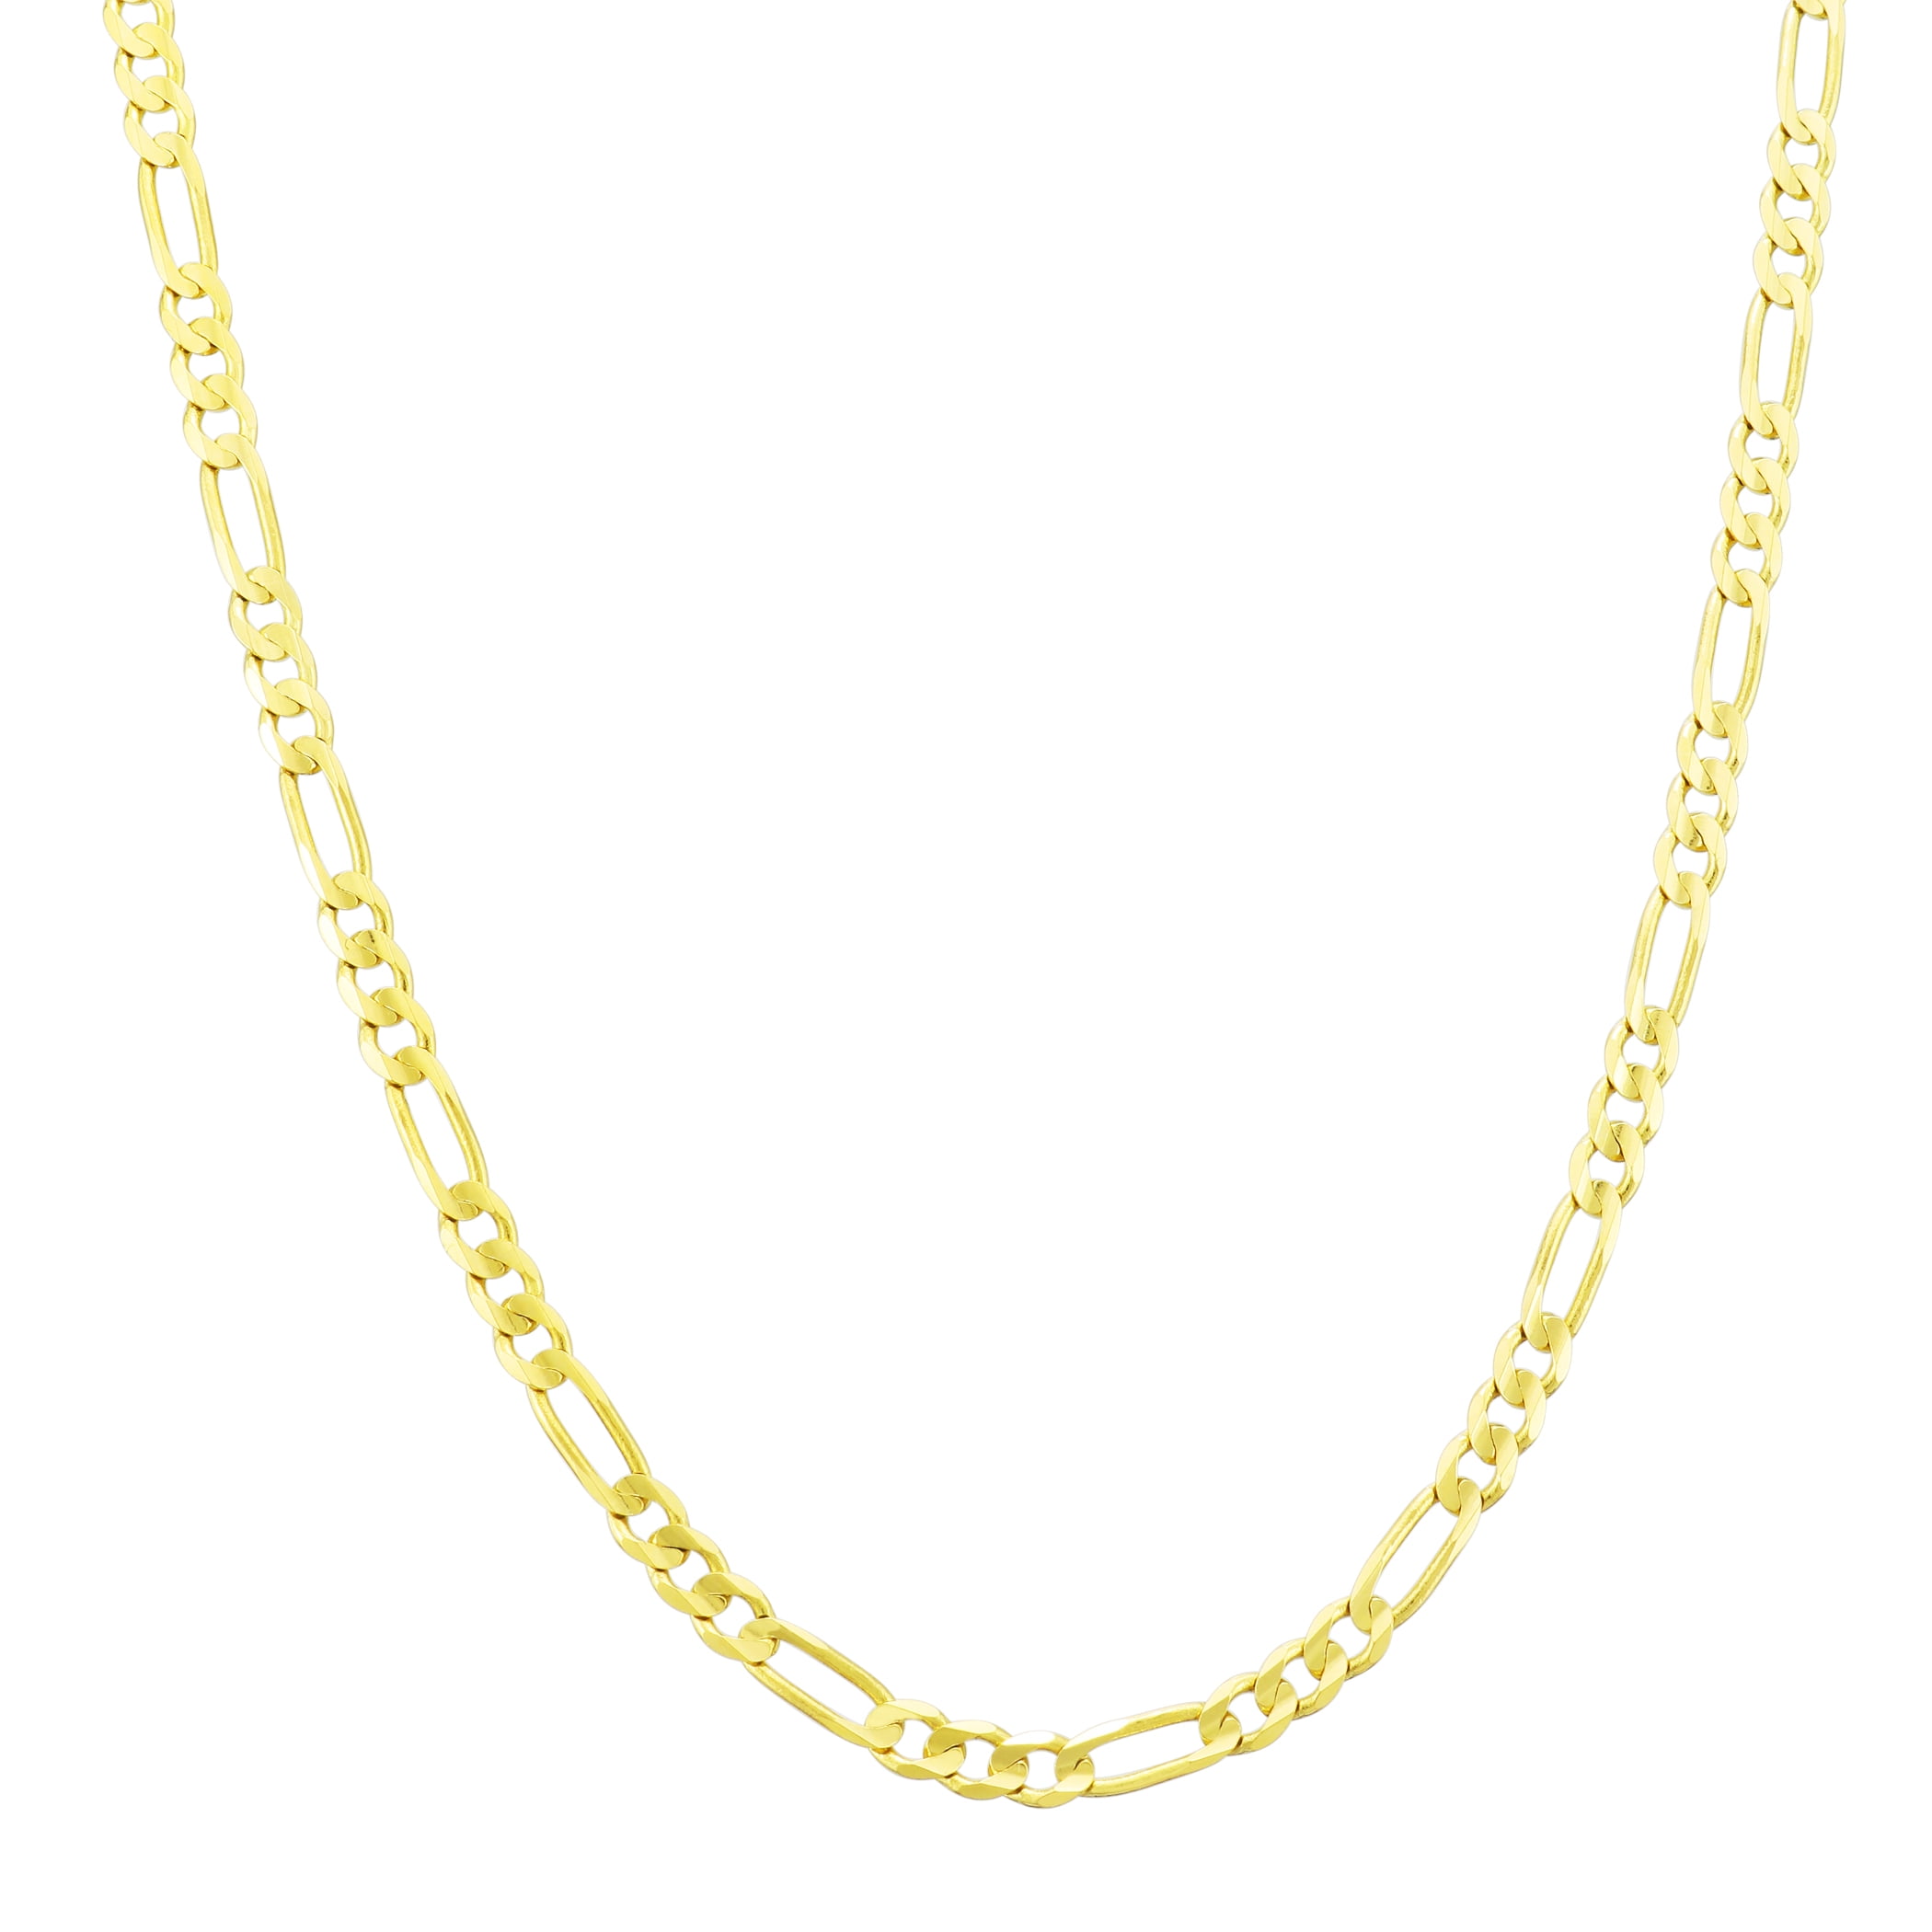 10K Solid Gold 2.6mm Italian Figaro Chain Link Pendant Necklace 14"-30" 